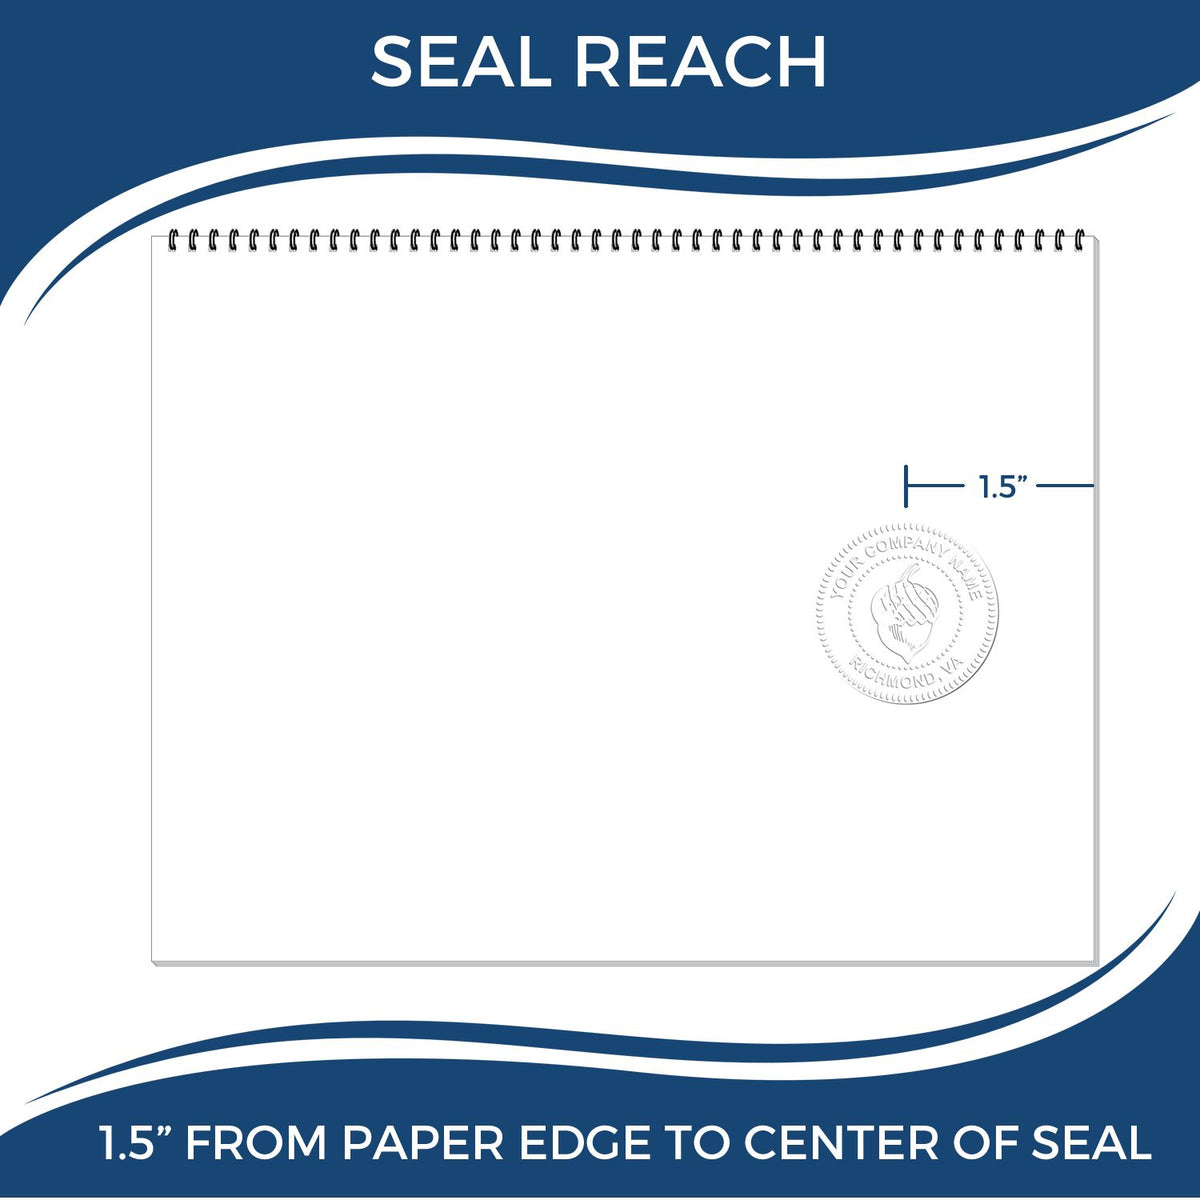 An infographic showing the seal reach which is represented by a ruler and a miniature seal image of the Handheld Nebraska Professional Geologist Embosser